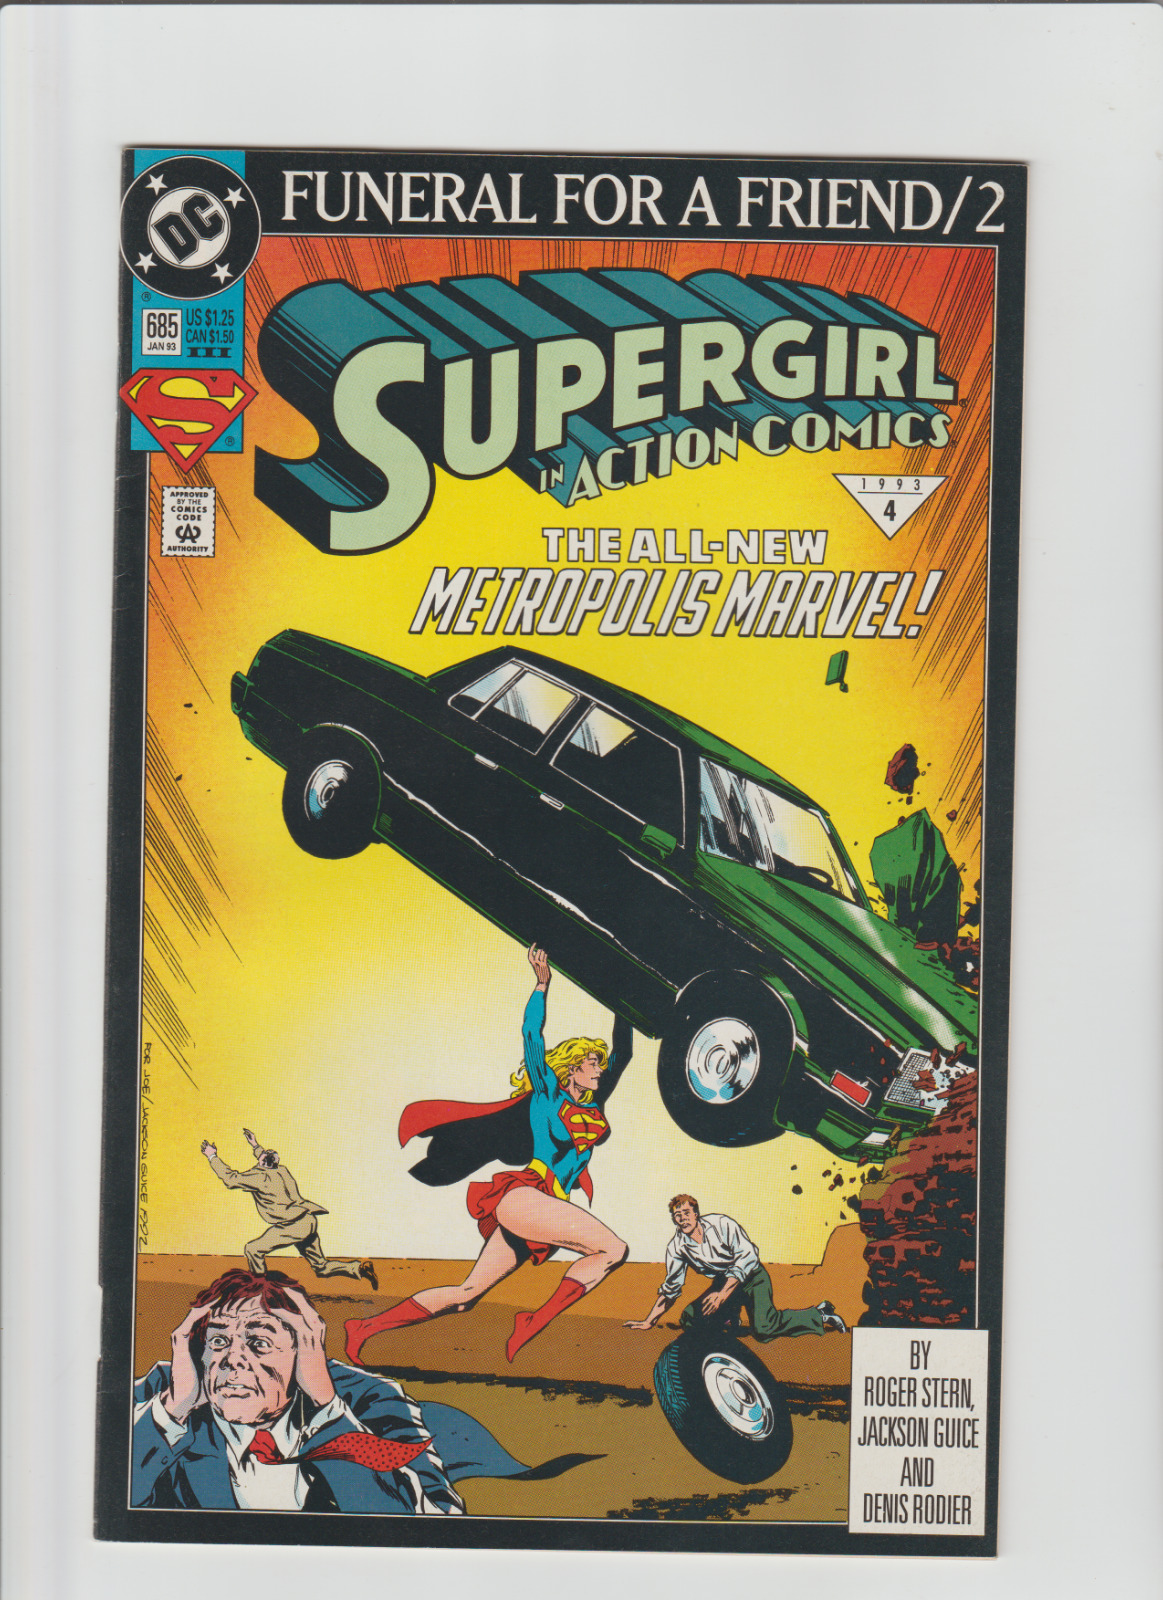 SUPERMAN ACTION (1993 ) #685 FUNERAL FOR A FRIEND 3RD PRINT VARIANT #1 HOMAGE